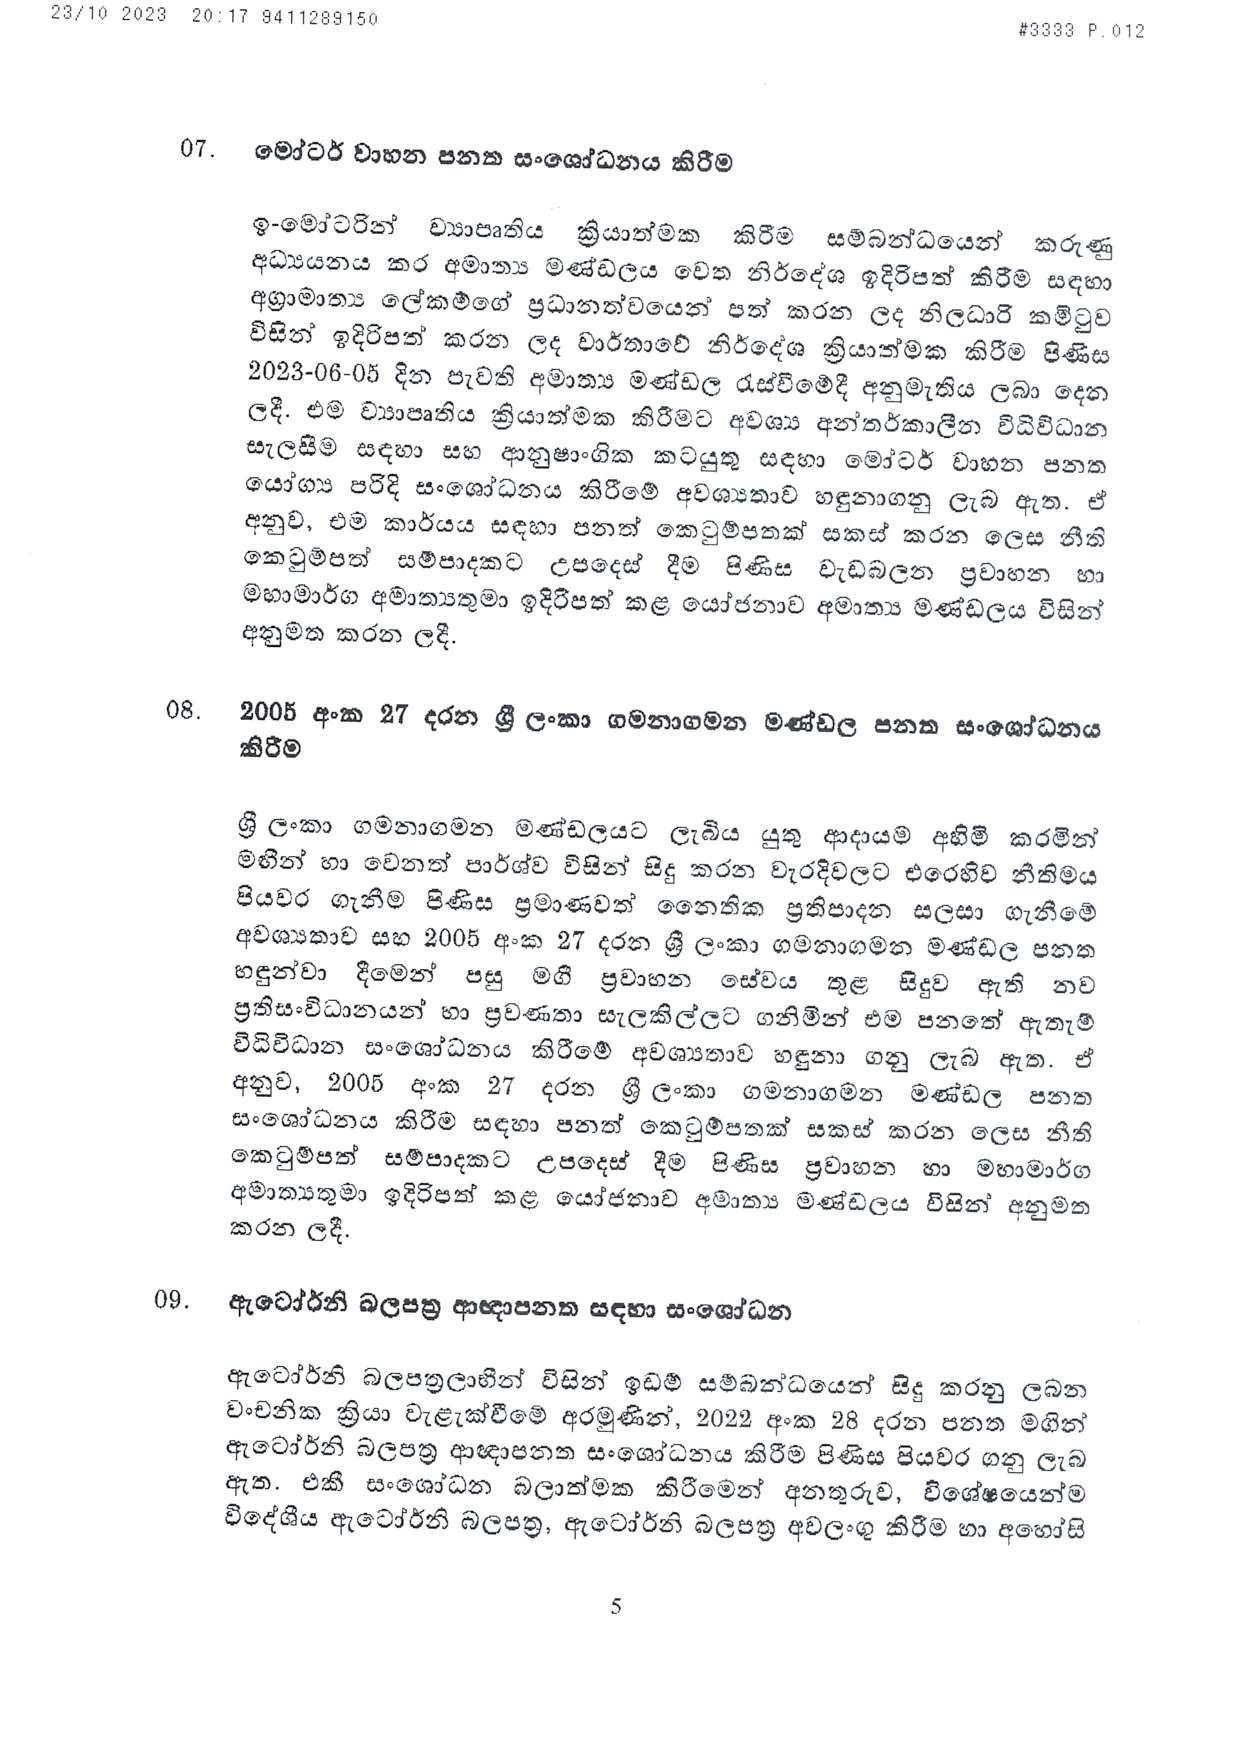 Cabinet Decision on 23.10.2023 page 005